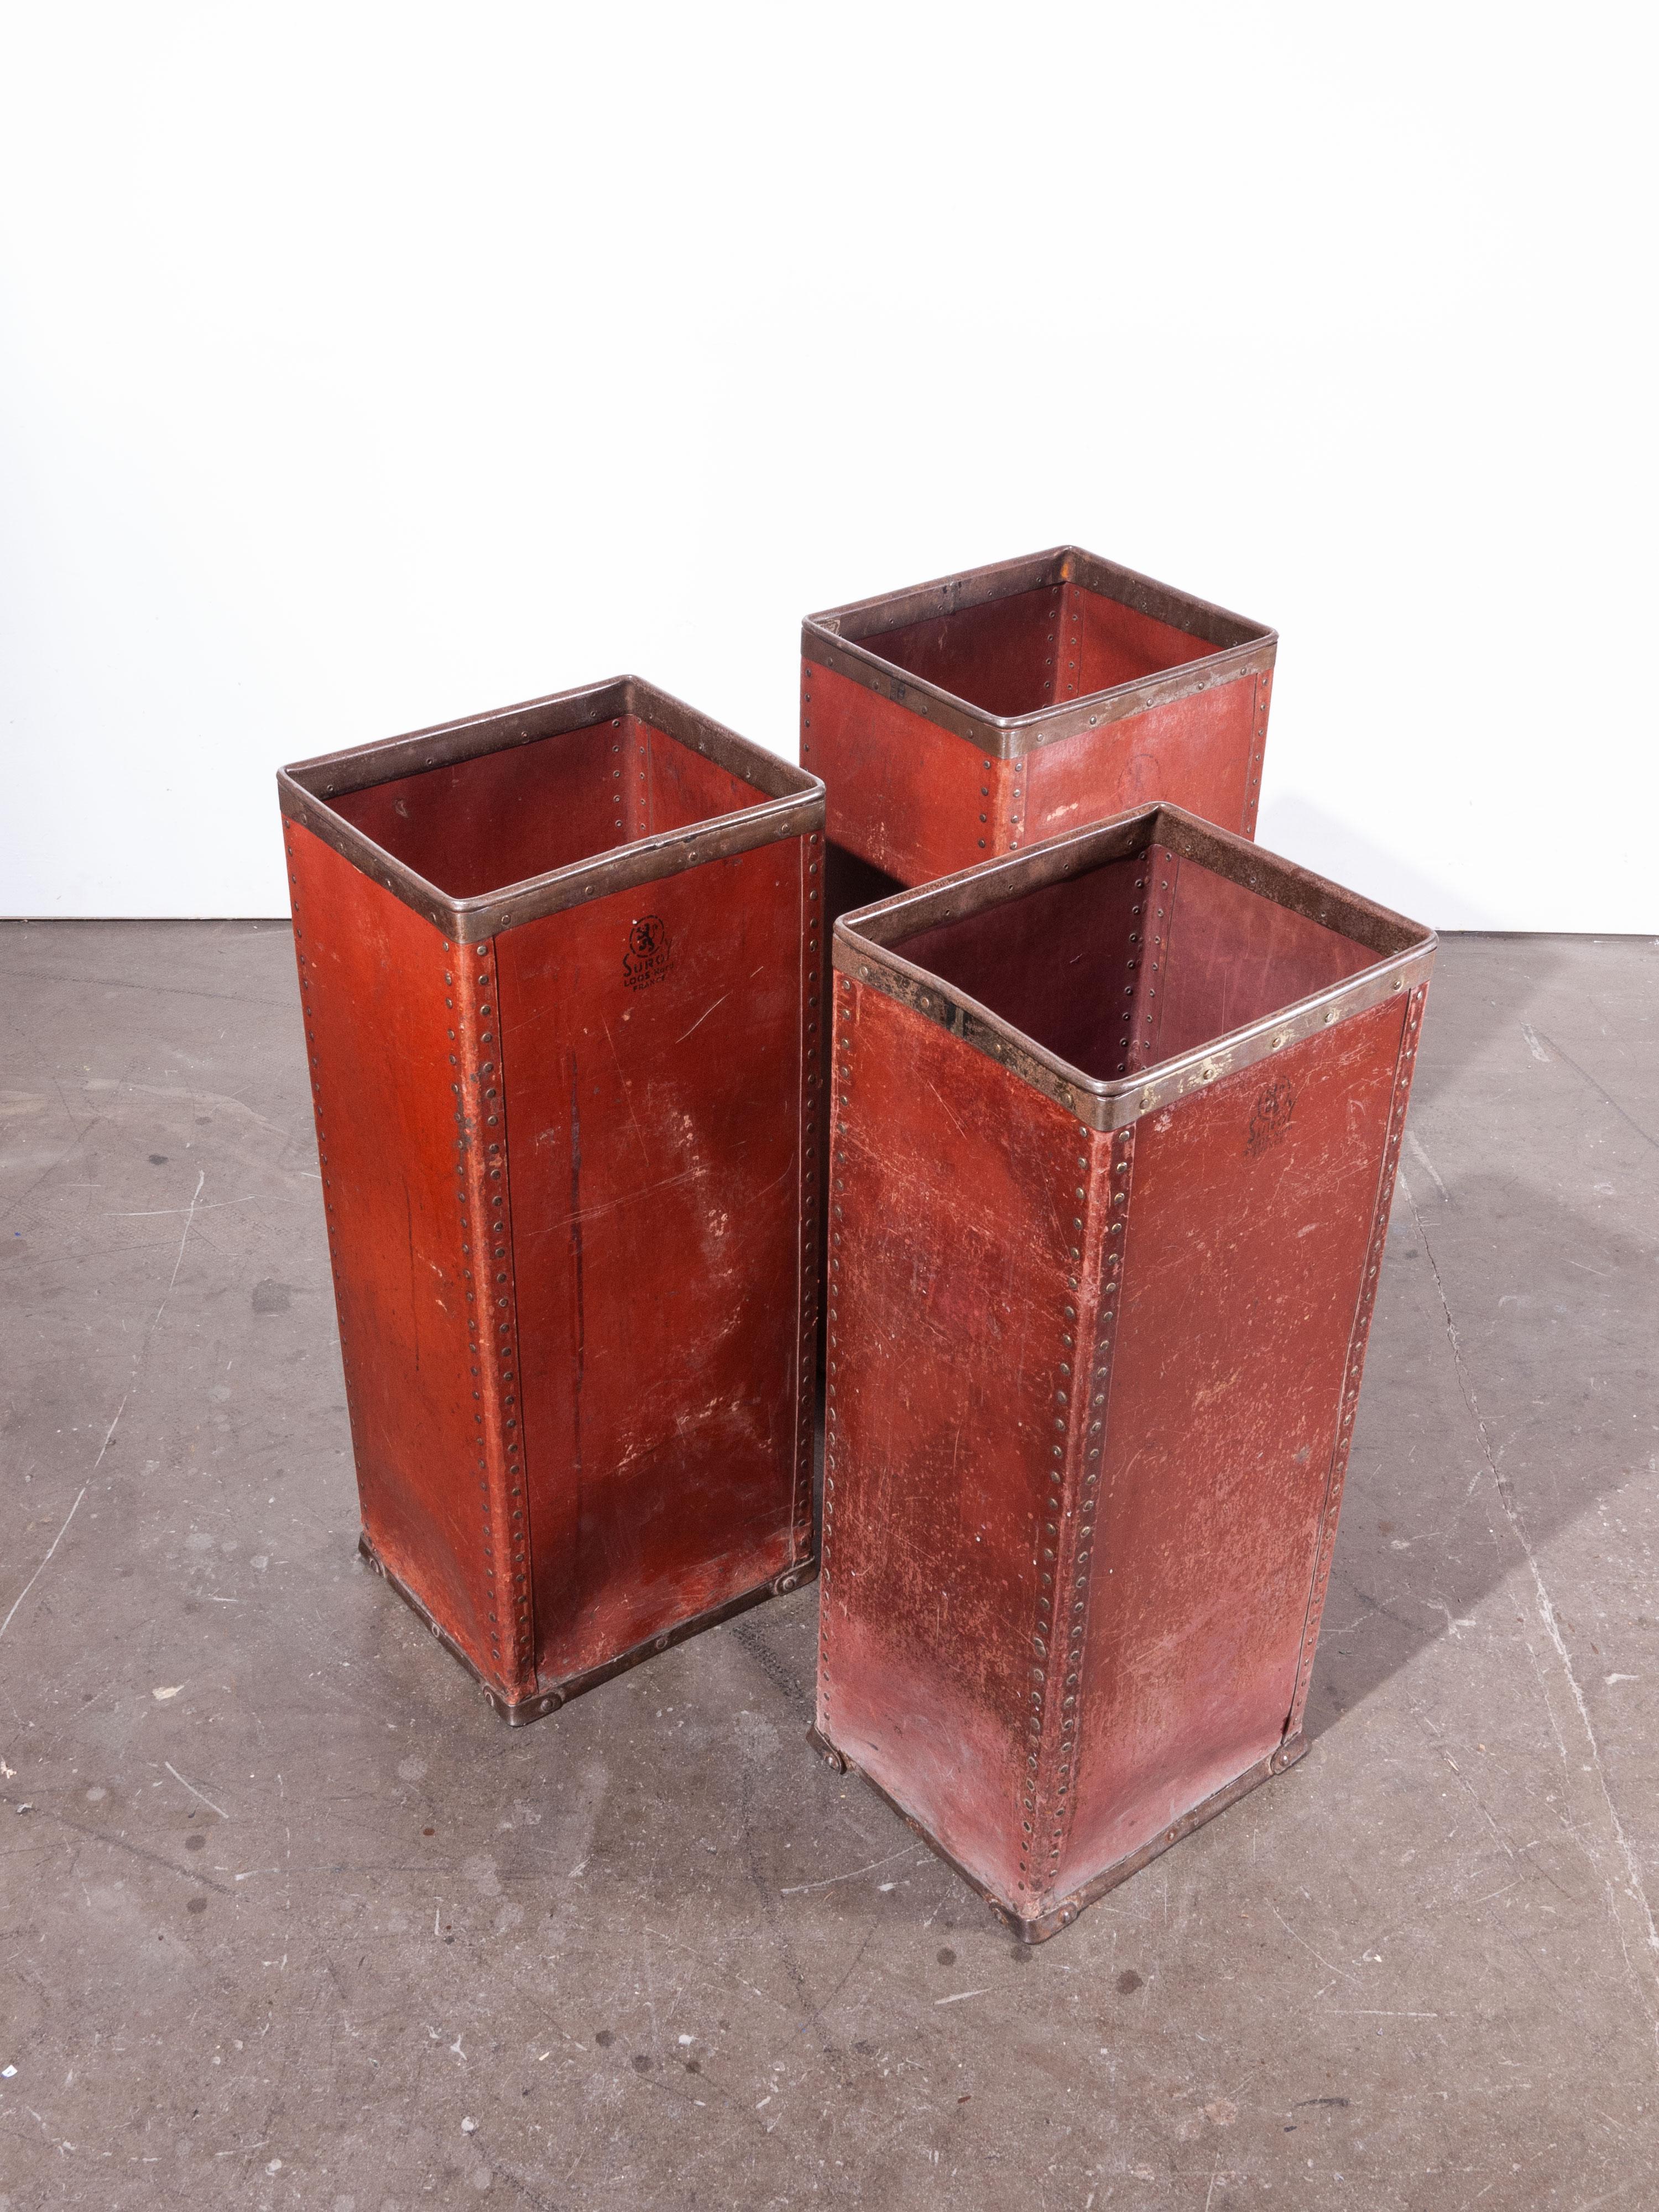 1930s original Suroy tall industrial storage boxes – Three available
1930s original Suroy tall industrial storage boxes. In 1853 the textile industrial revolution arrived in Loos, Nord France with the formation of the Esquermes factory by Alfred